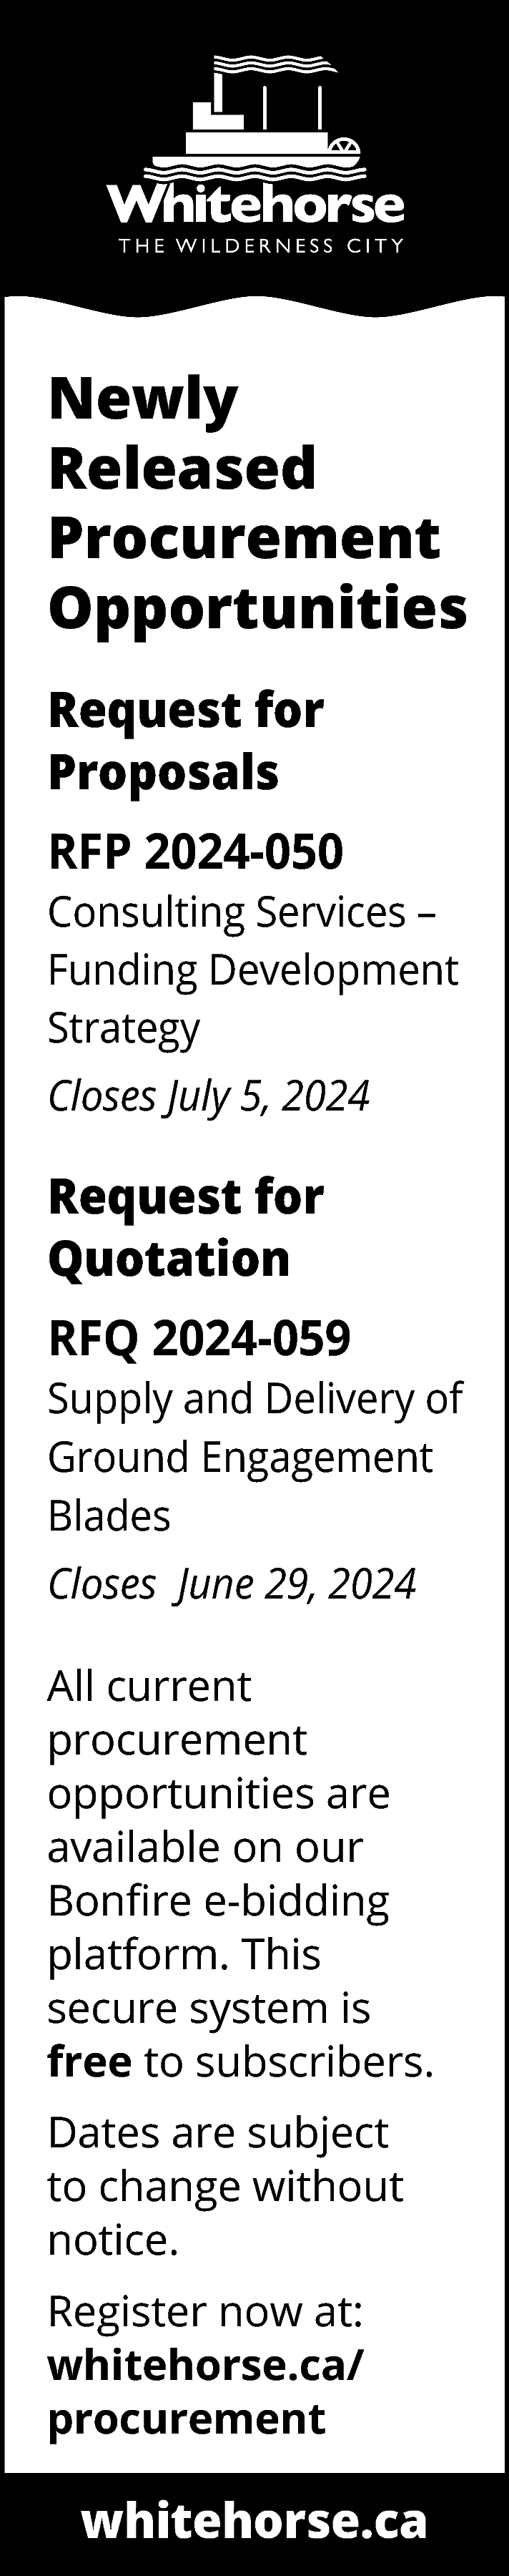 Newly <br>Released <br>Procurement <br>Opportunities <br>Request  Newly  Released  Procurement  Opportunities  Request for  Proposals  RFP 2024-050  Consulting Services –  Funding Development  Strategy  Closes July 5, 2024    Request for  Quotation  RFQ 2024-059  Supply and Delivery of  Ground Engagement  Blades  Closes June 29, 2024  All current  procurement  opportunities are  available on our  Bonfire e-bidding  platform. This  secure system is  free to subscribers.  Dates are subject  to change without  notice.  Register now at:  whitehorse.ca/  procurement    whitehorse.ca    